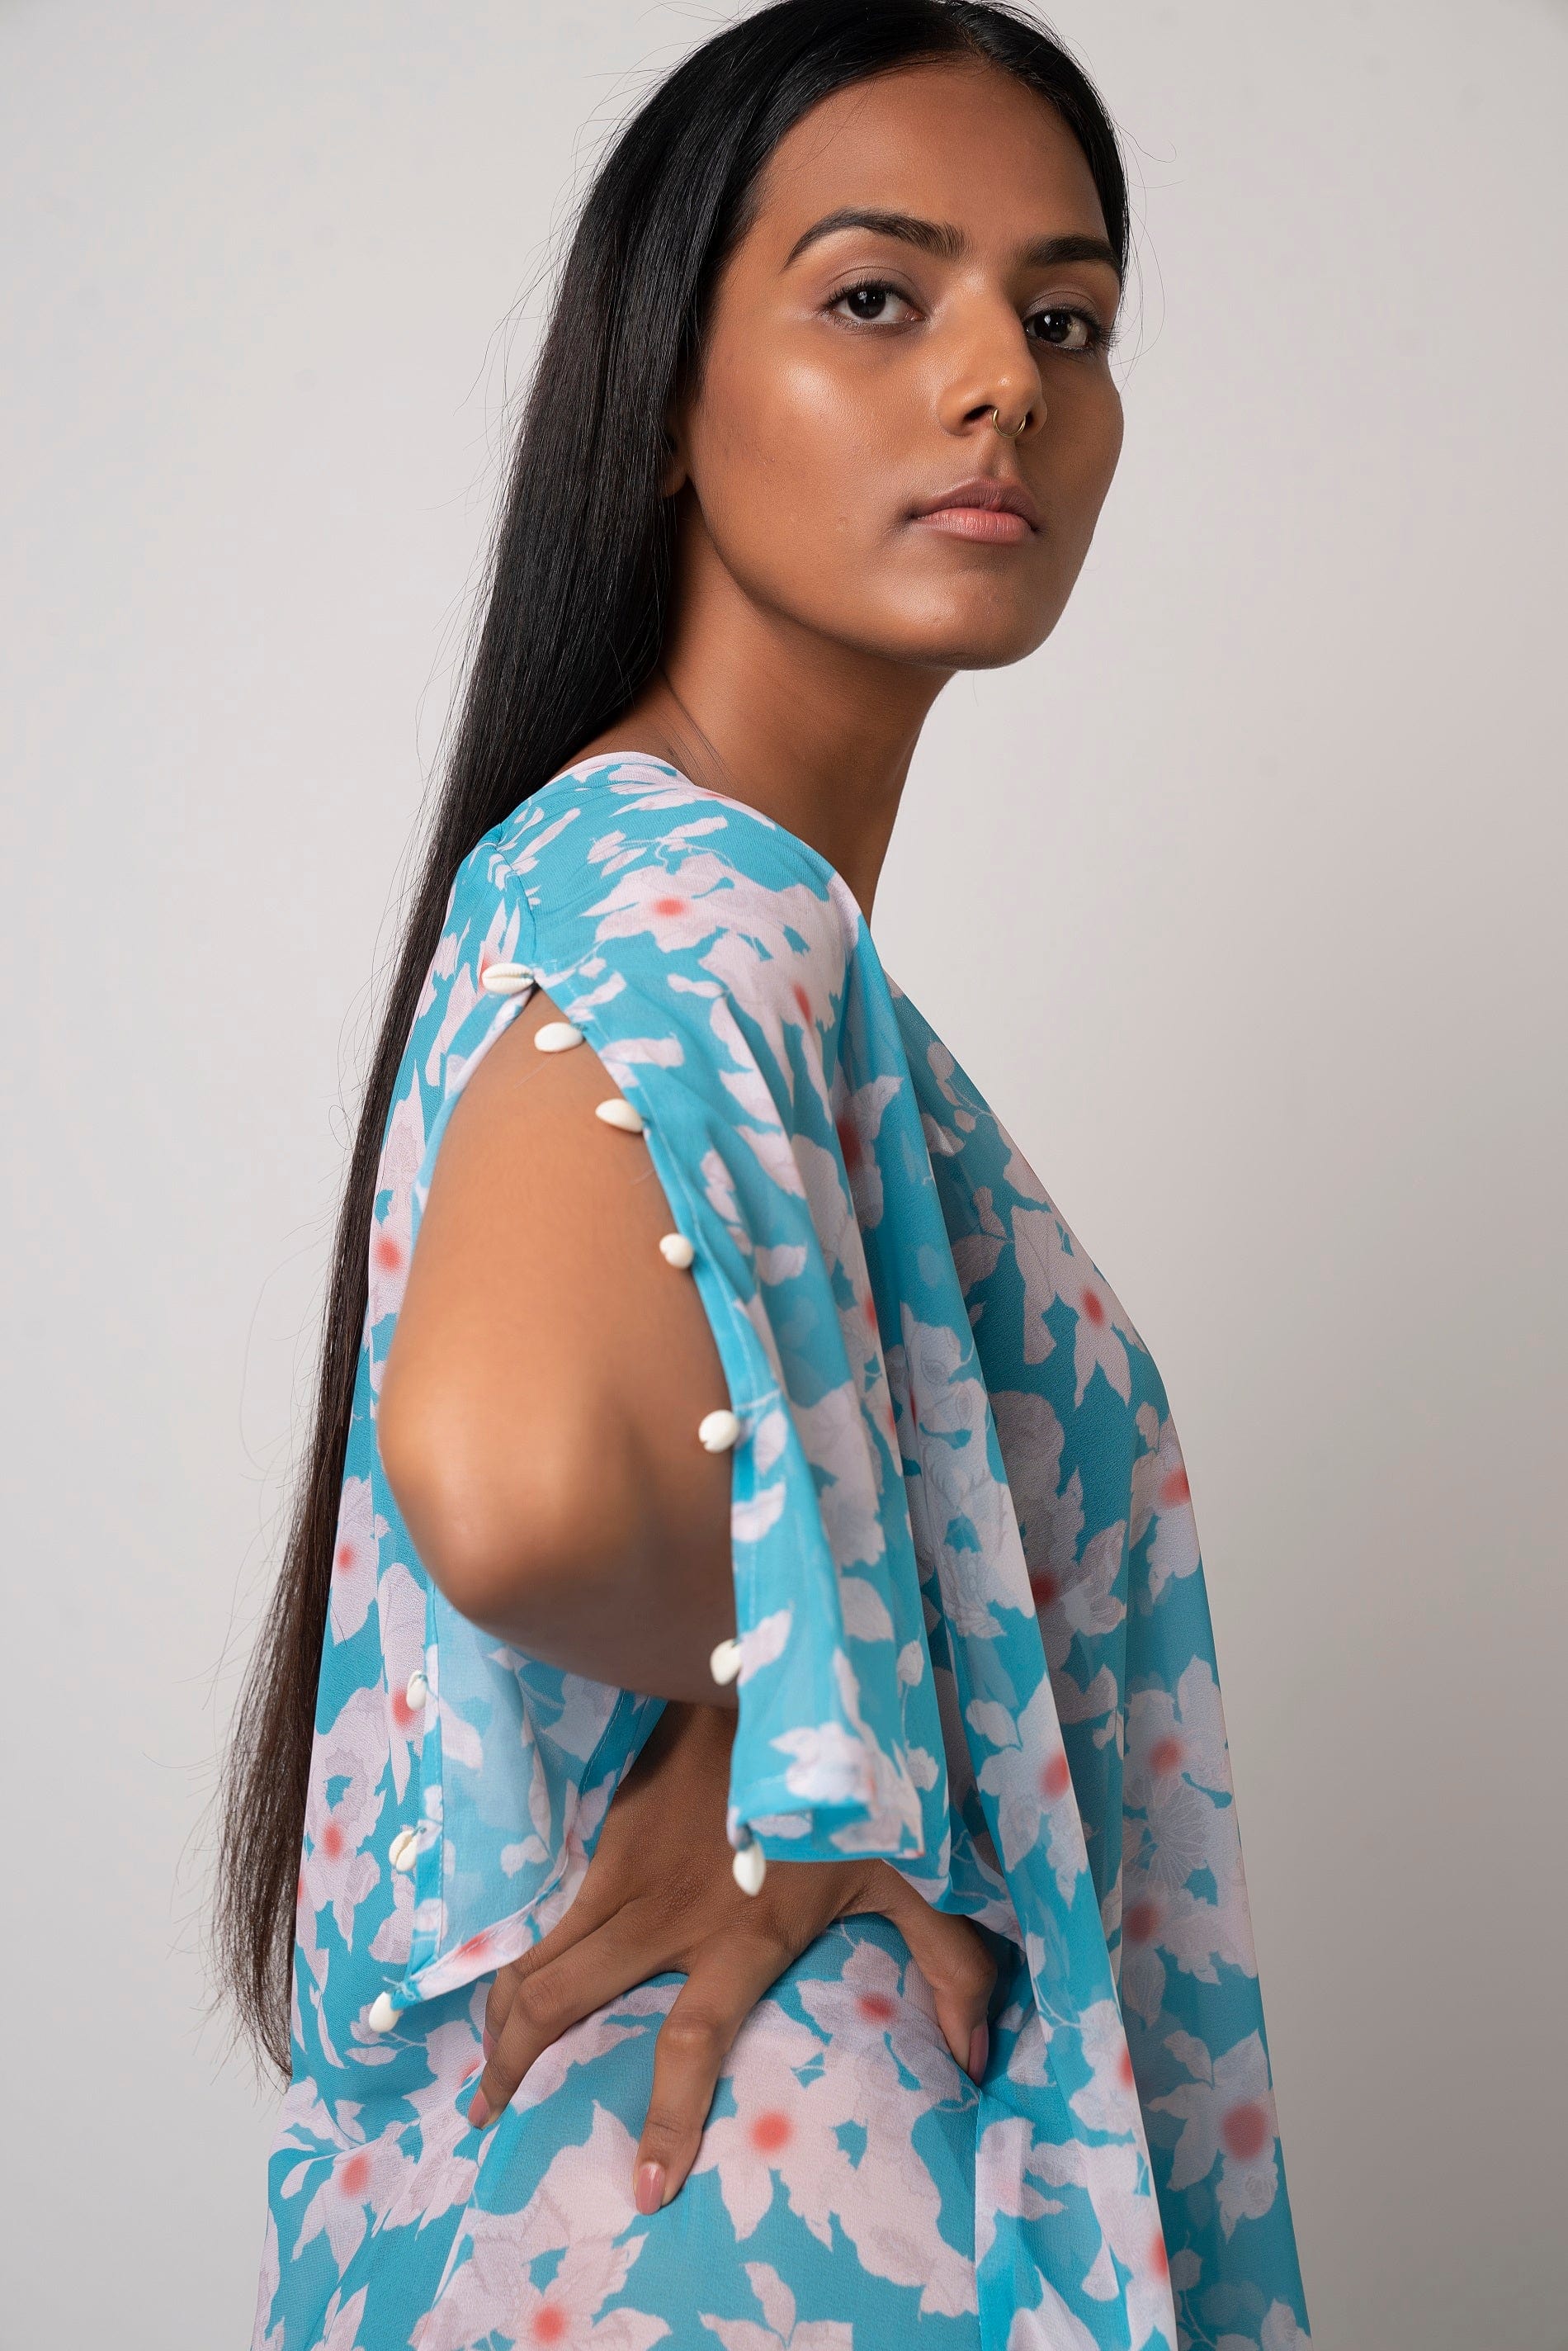 Floral Print Blue Maxi Beach Dress with Tie Back - IMALLURE – imallure